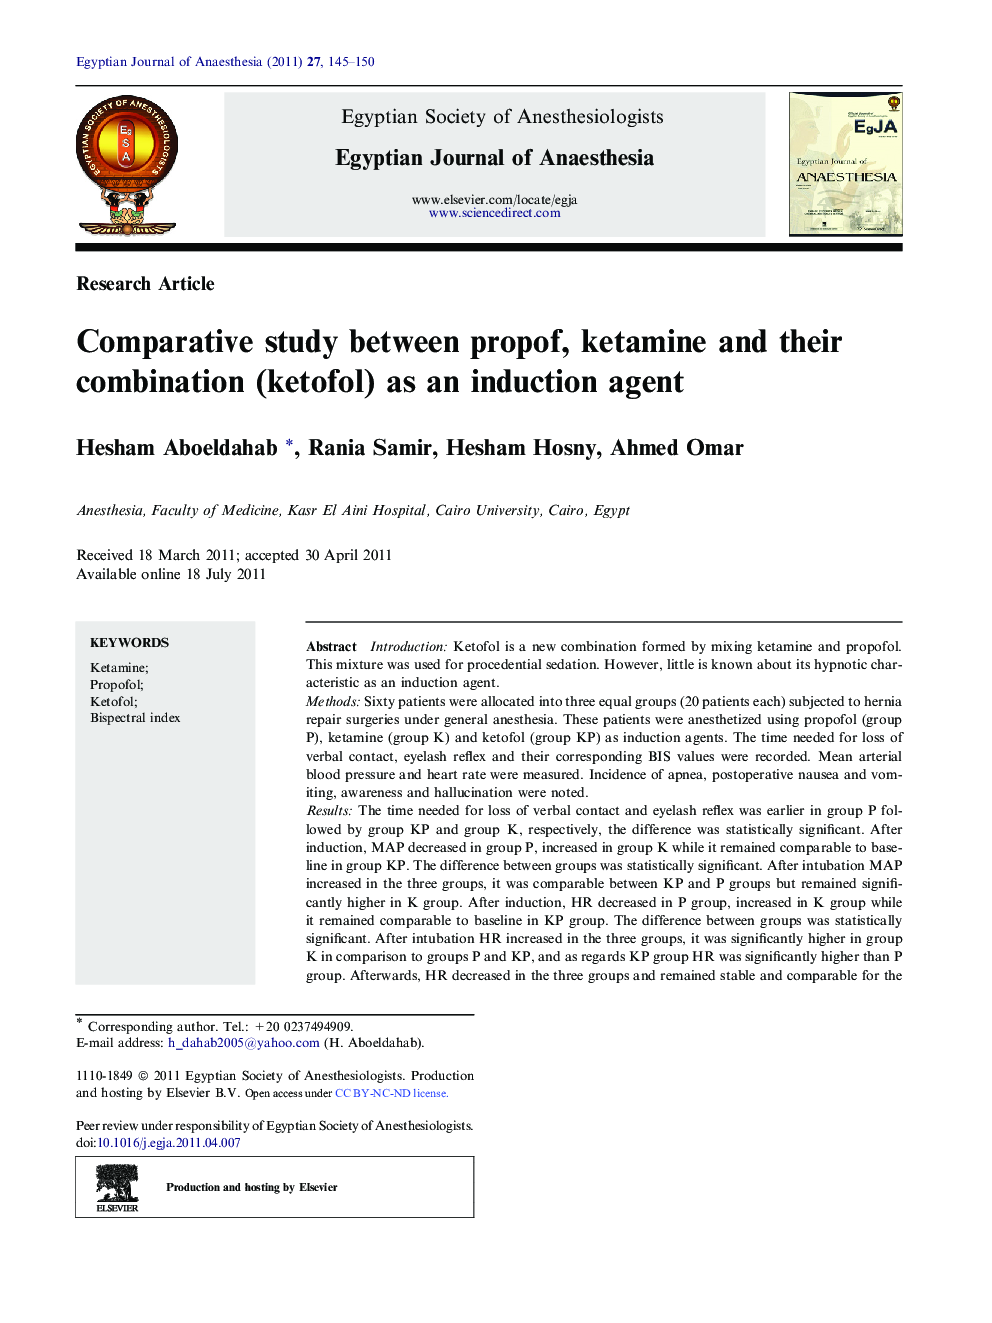 Comparative study between propof, ketamine and their combination (ketofol) as an induction agent 